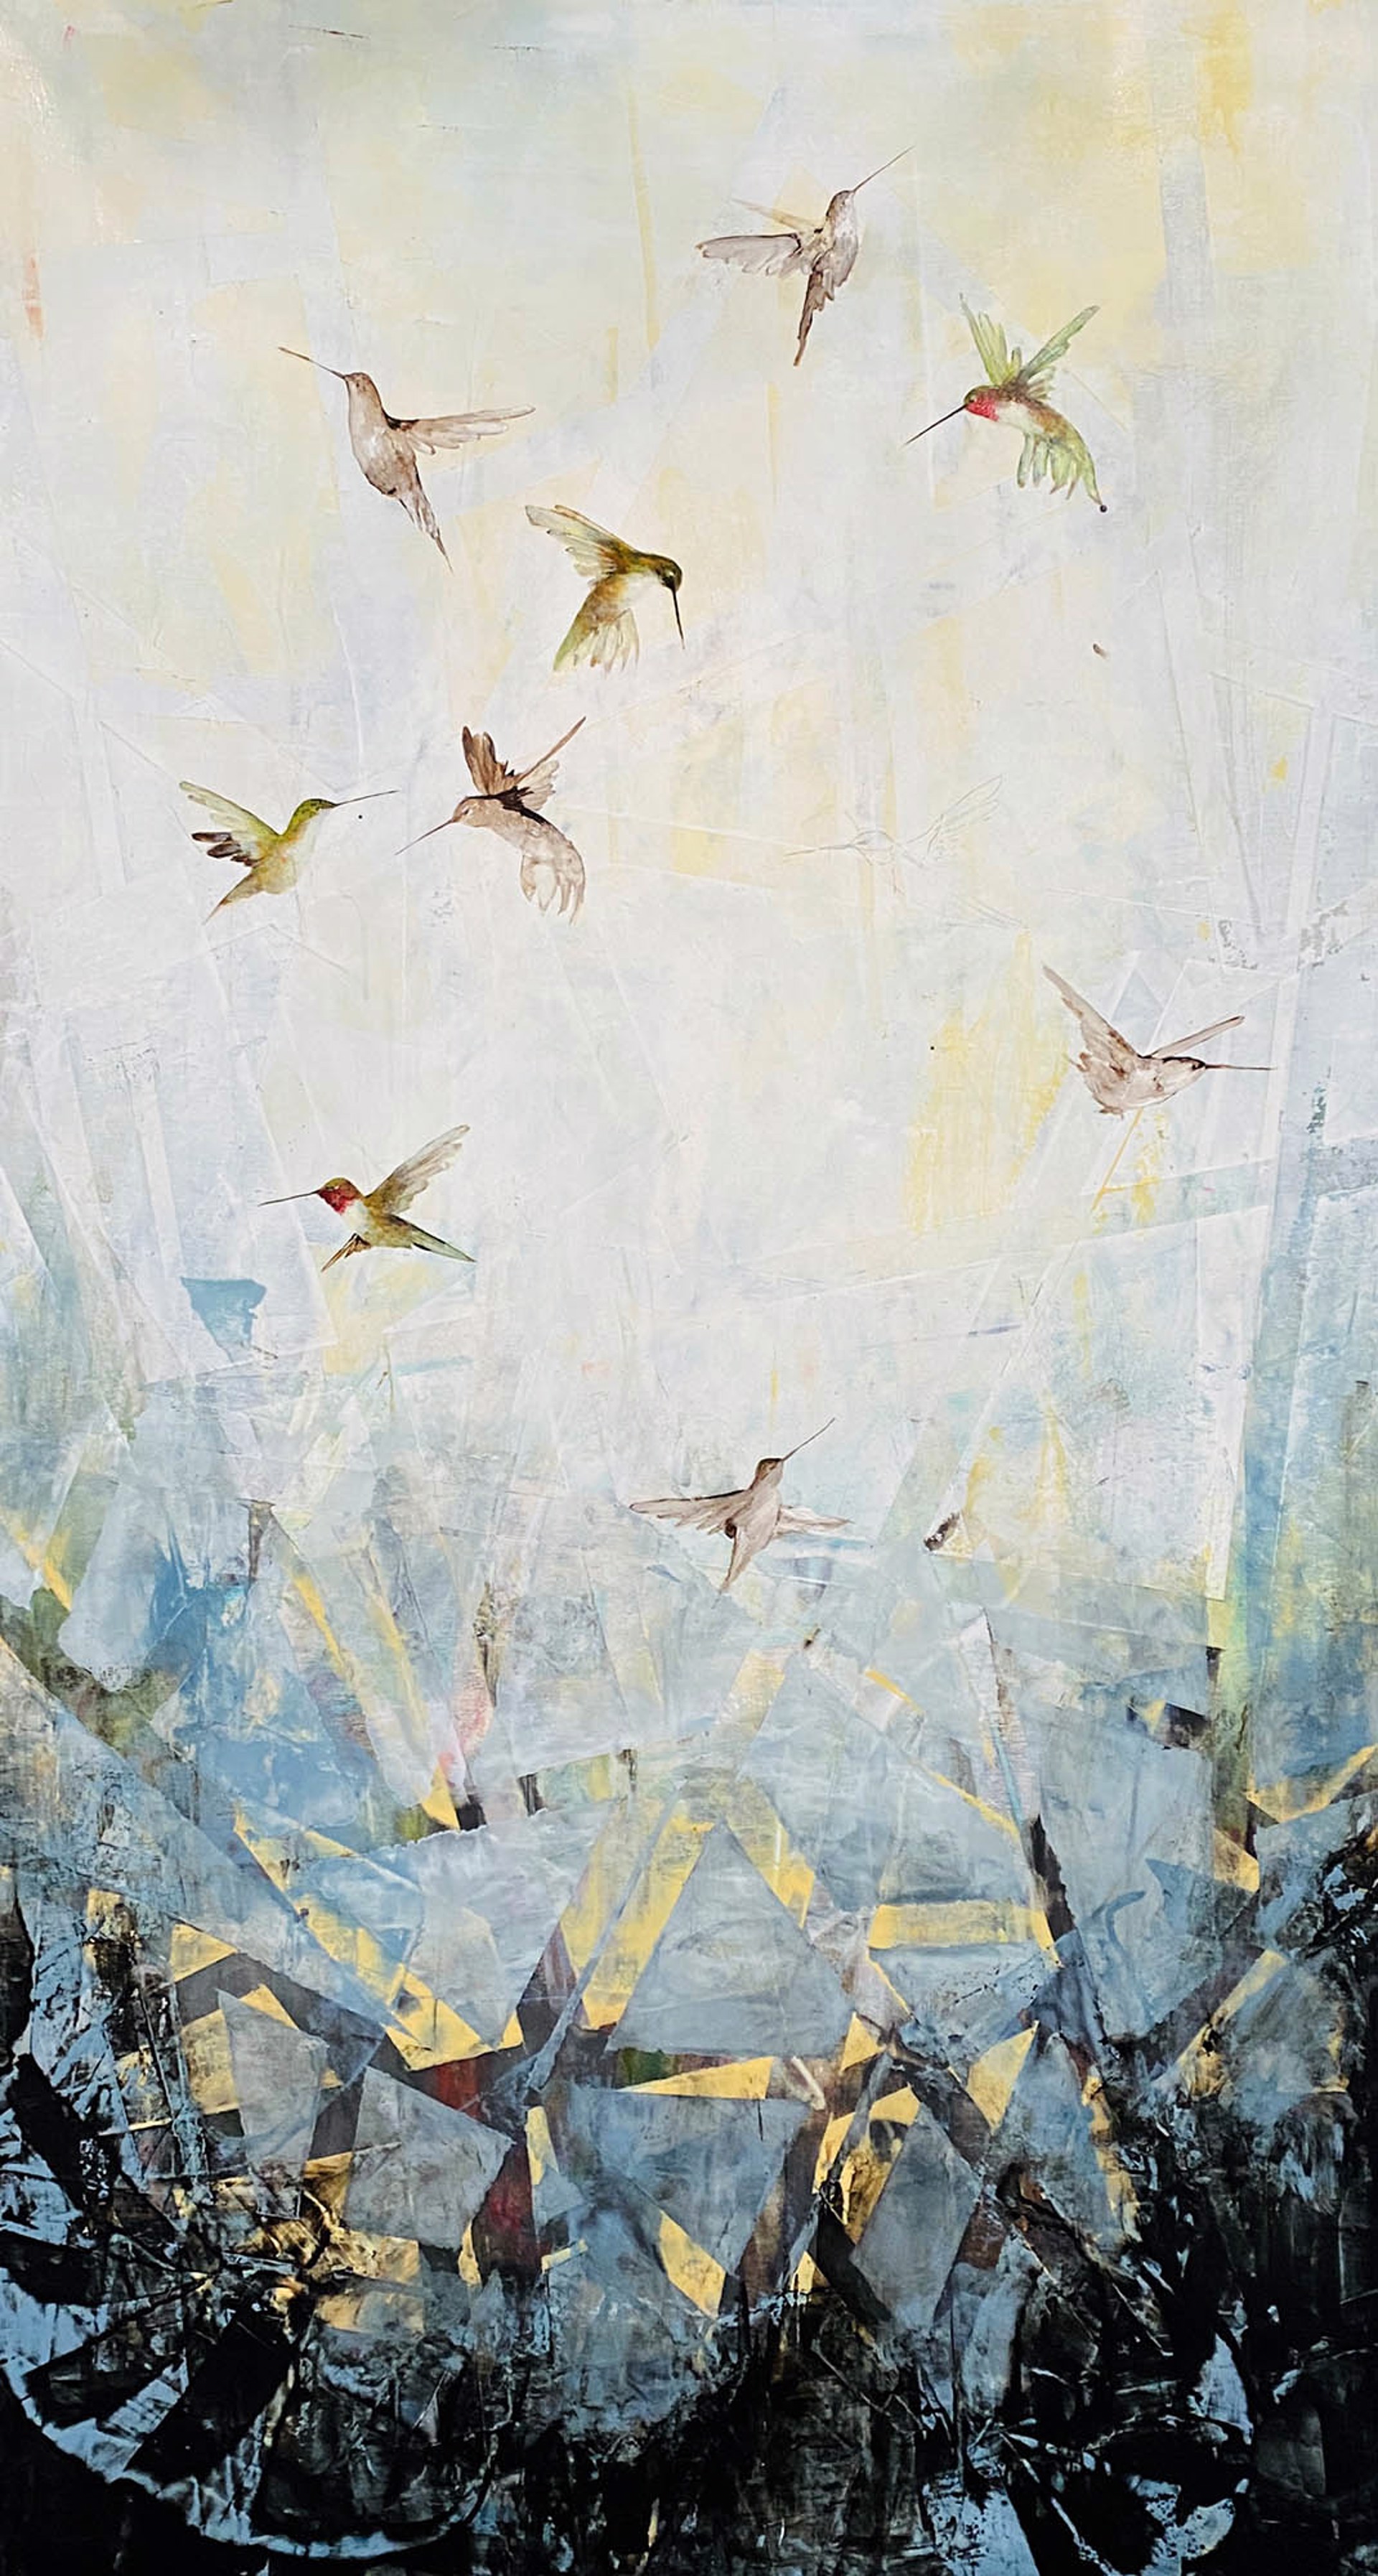 Original Oil Painting By Jenna Von Benedikt Featuring A Flurry Of Hummingbirds Over Abstract Background In Grays And Blues